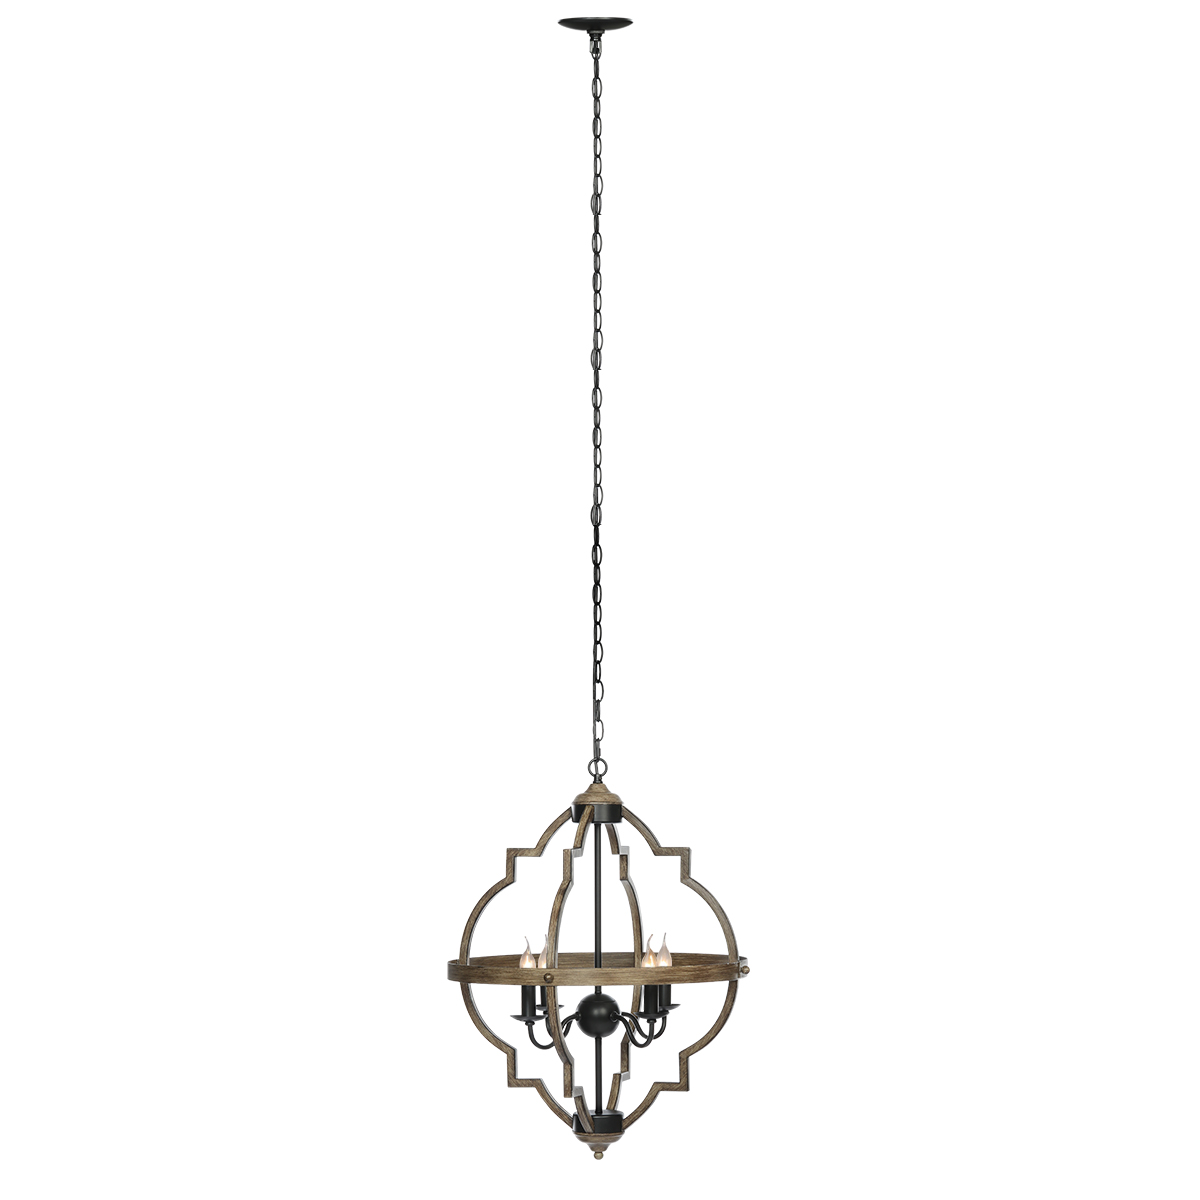 Find 4 Light Pendant Lighting Rustic Metal Chandelier Industrial Ceiling Hanging Lamp for Sale on Gipsybee.com with cryptocurrencies